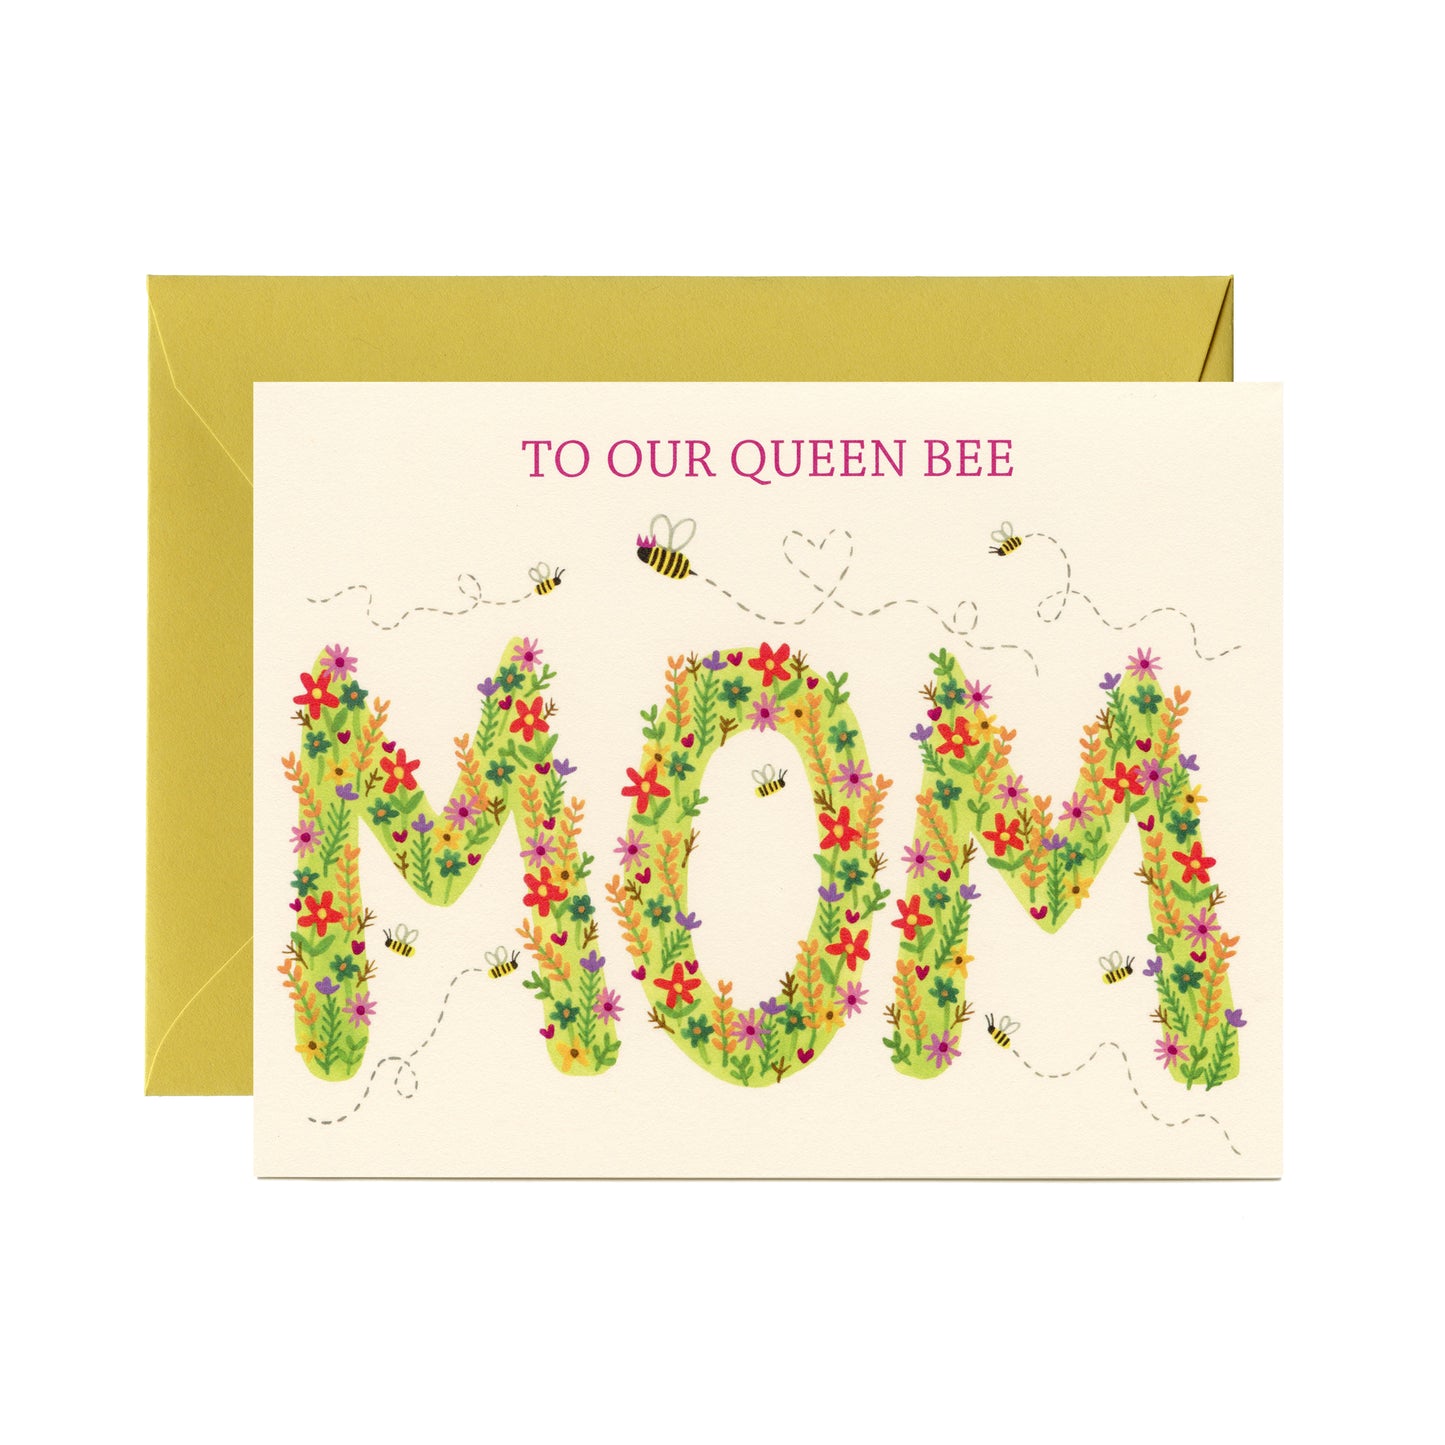 QUEEN BEE AND FLOWERS - MOTHER'S DAY GREETING CARD